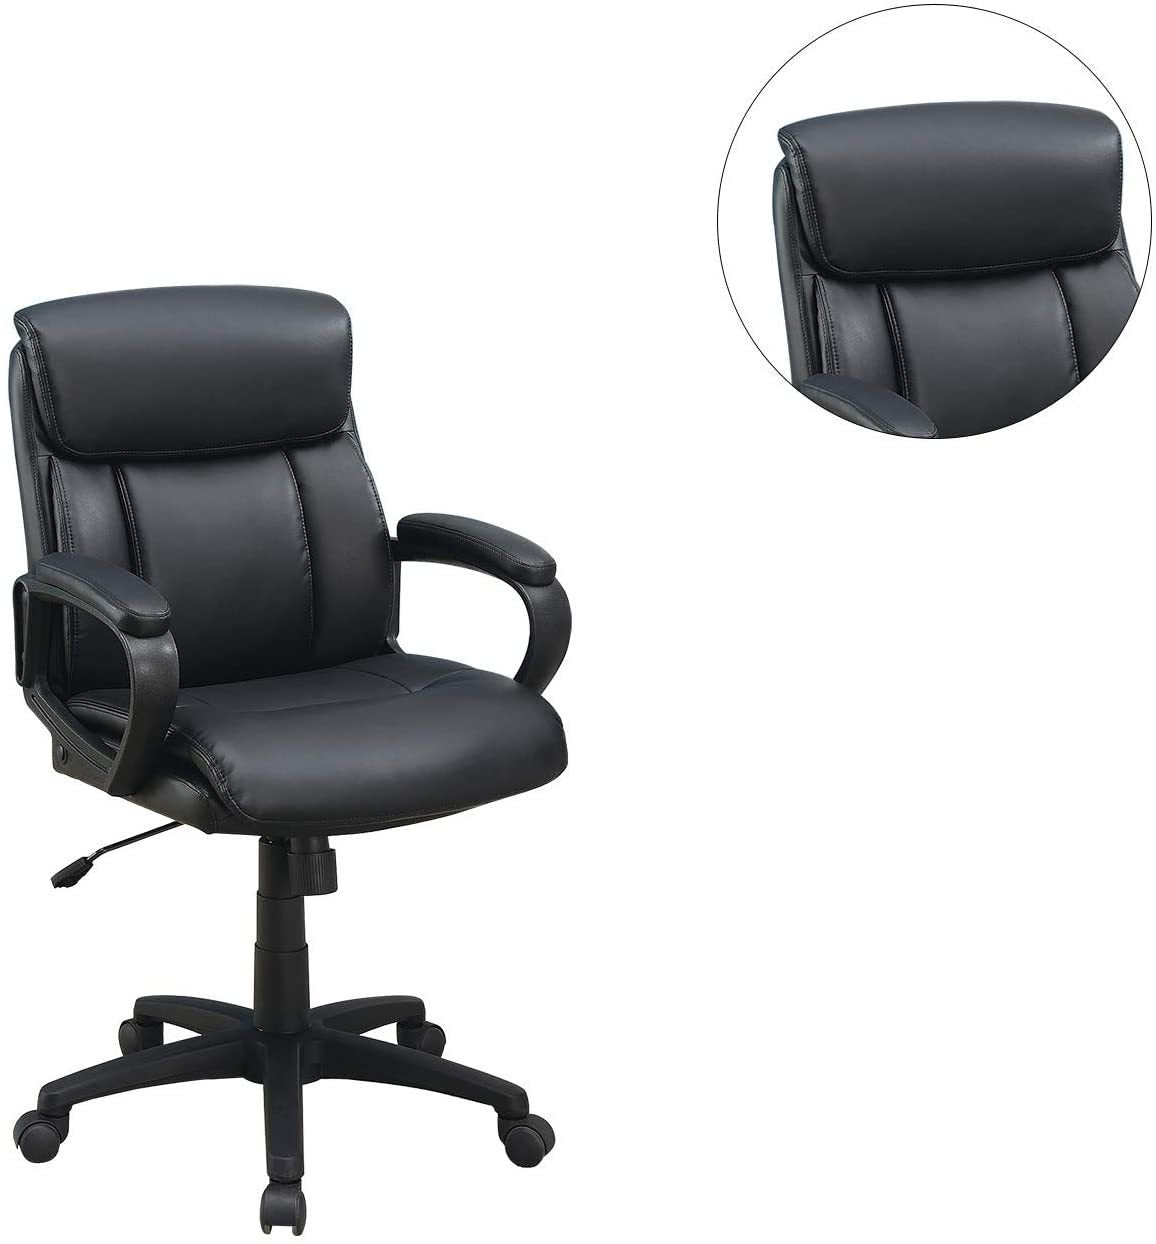 Classic Office Chair (Black)